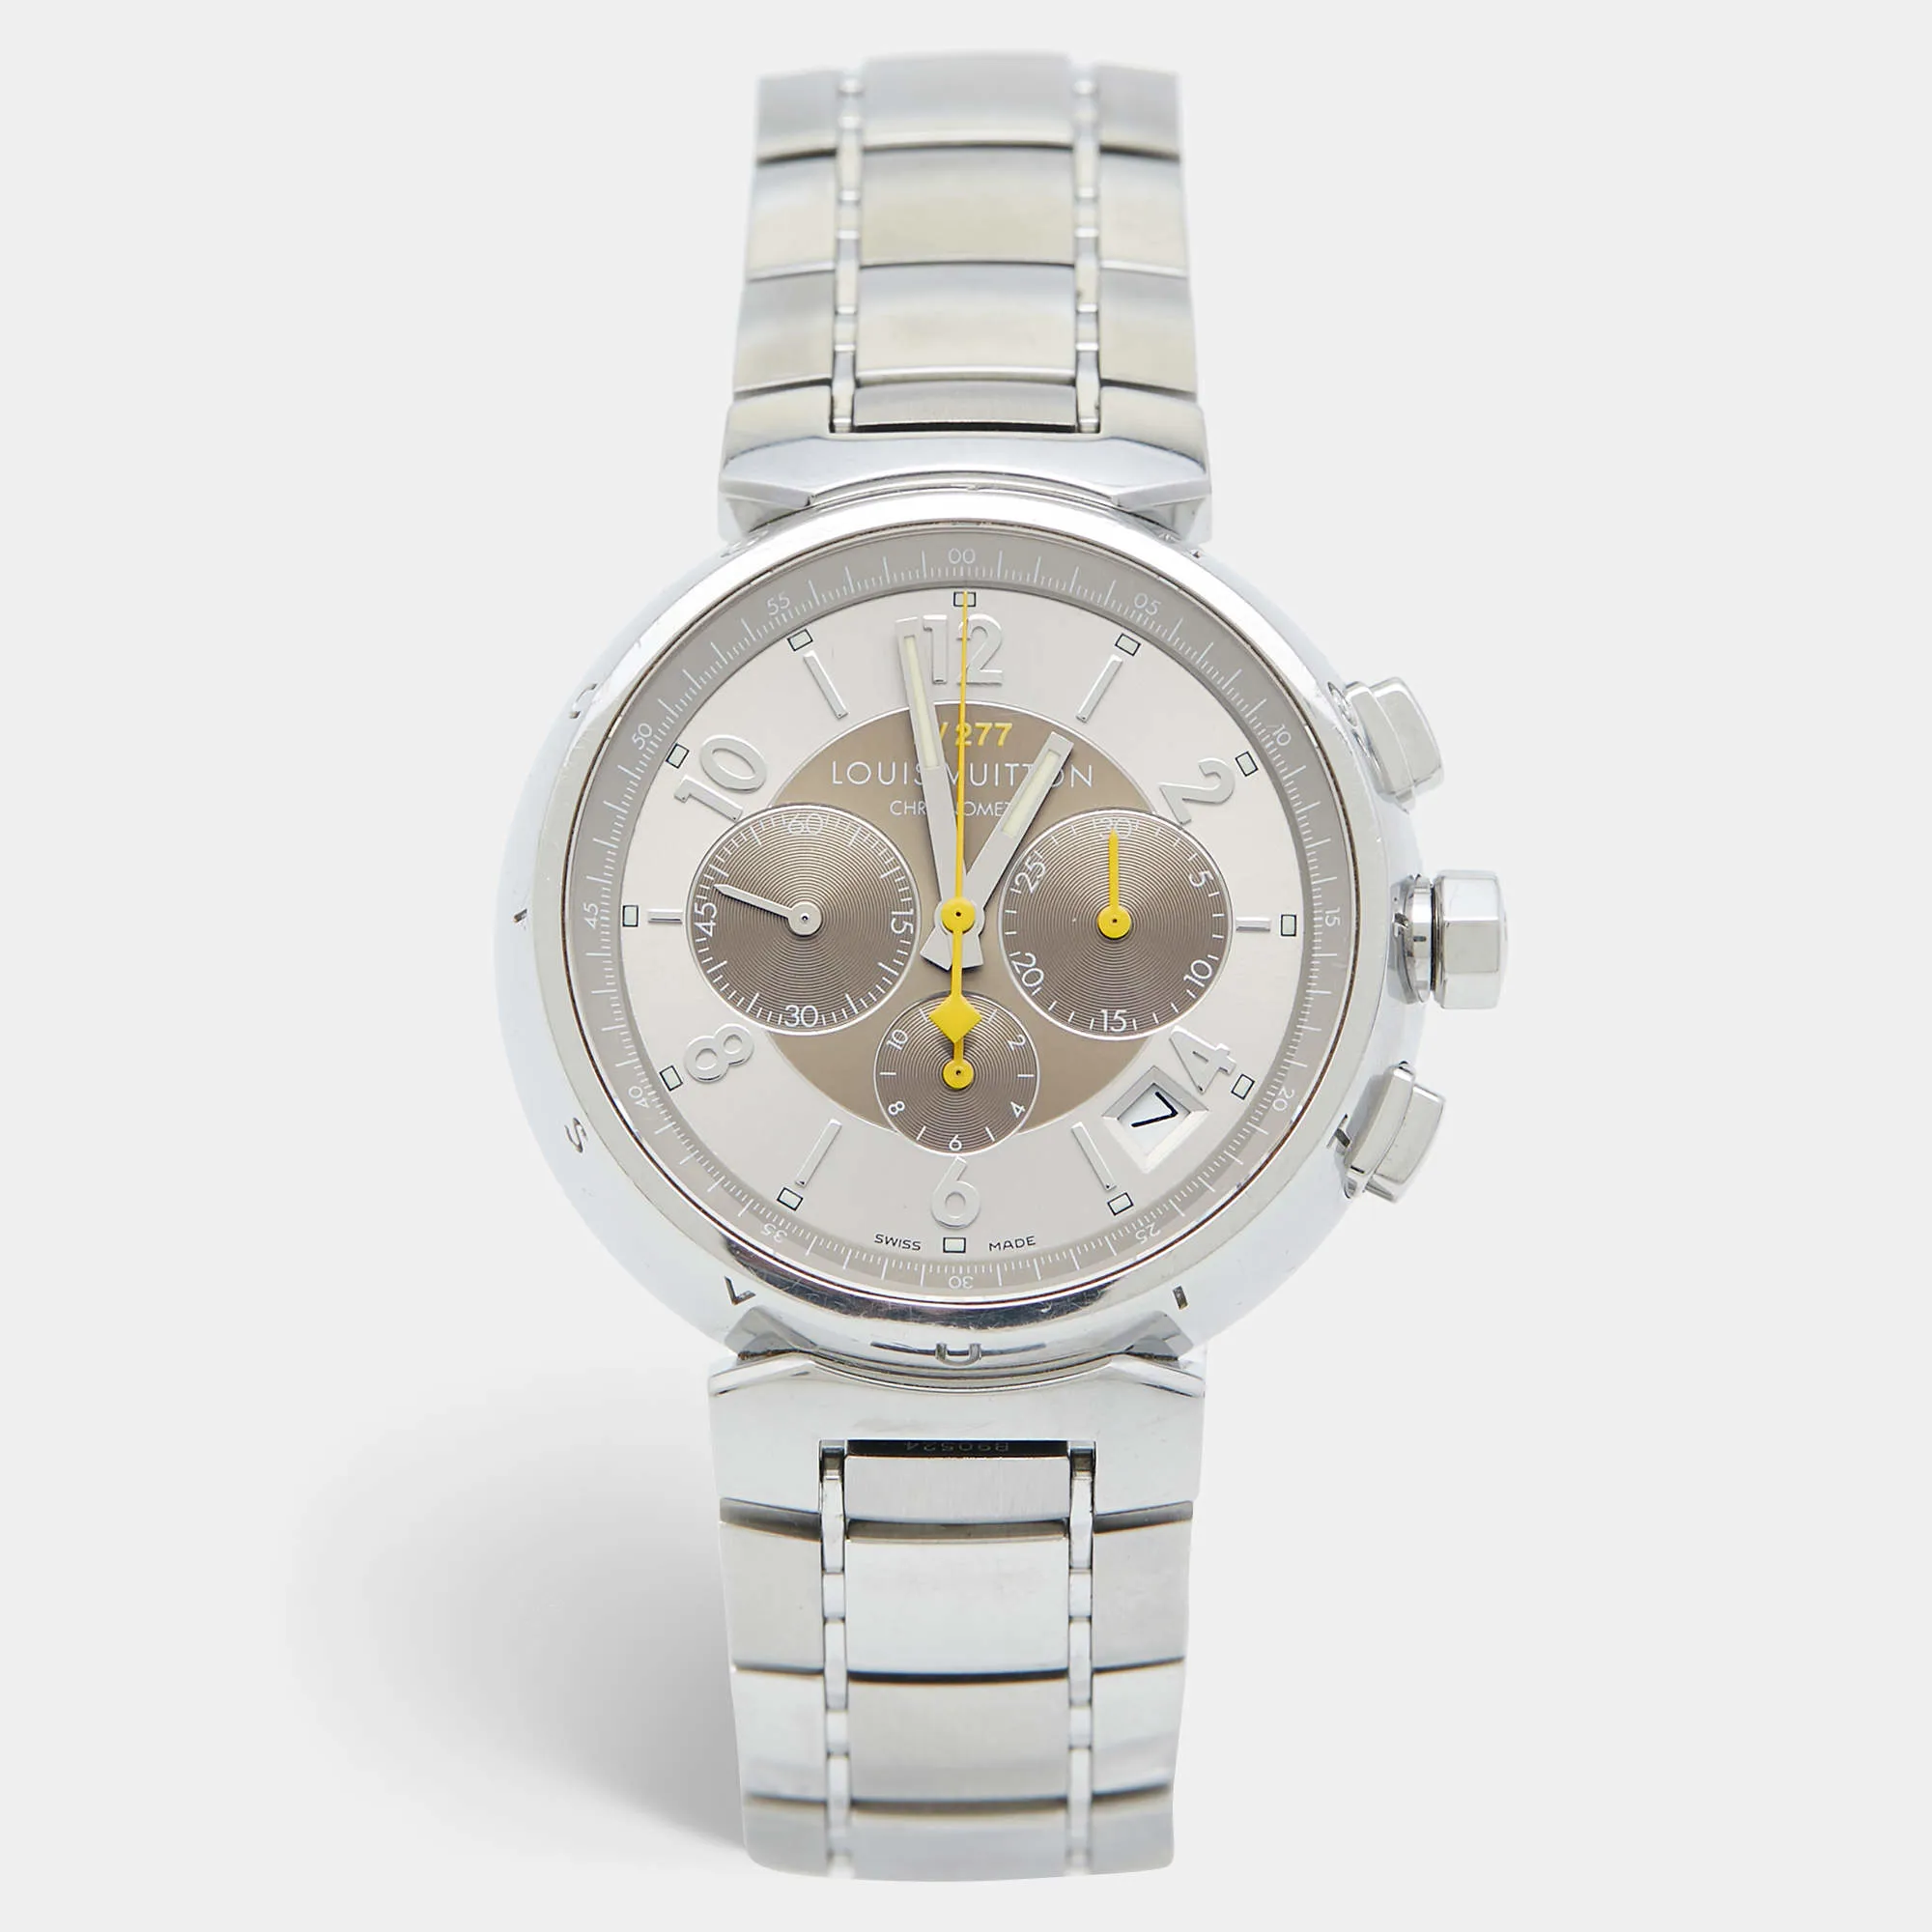 Louis Vuitton Tambour Q1142 41mm Stainless steel Champagne